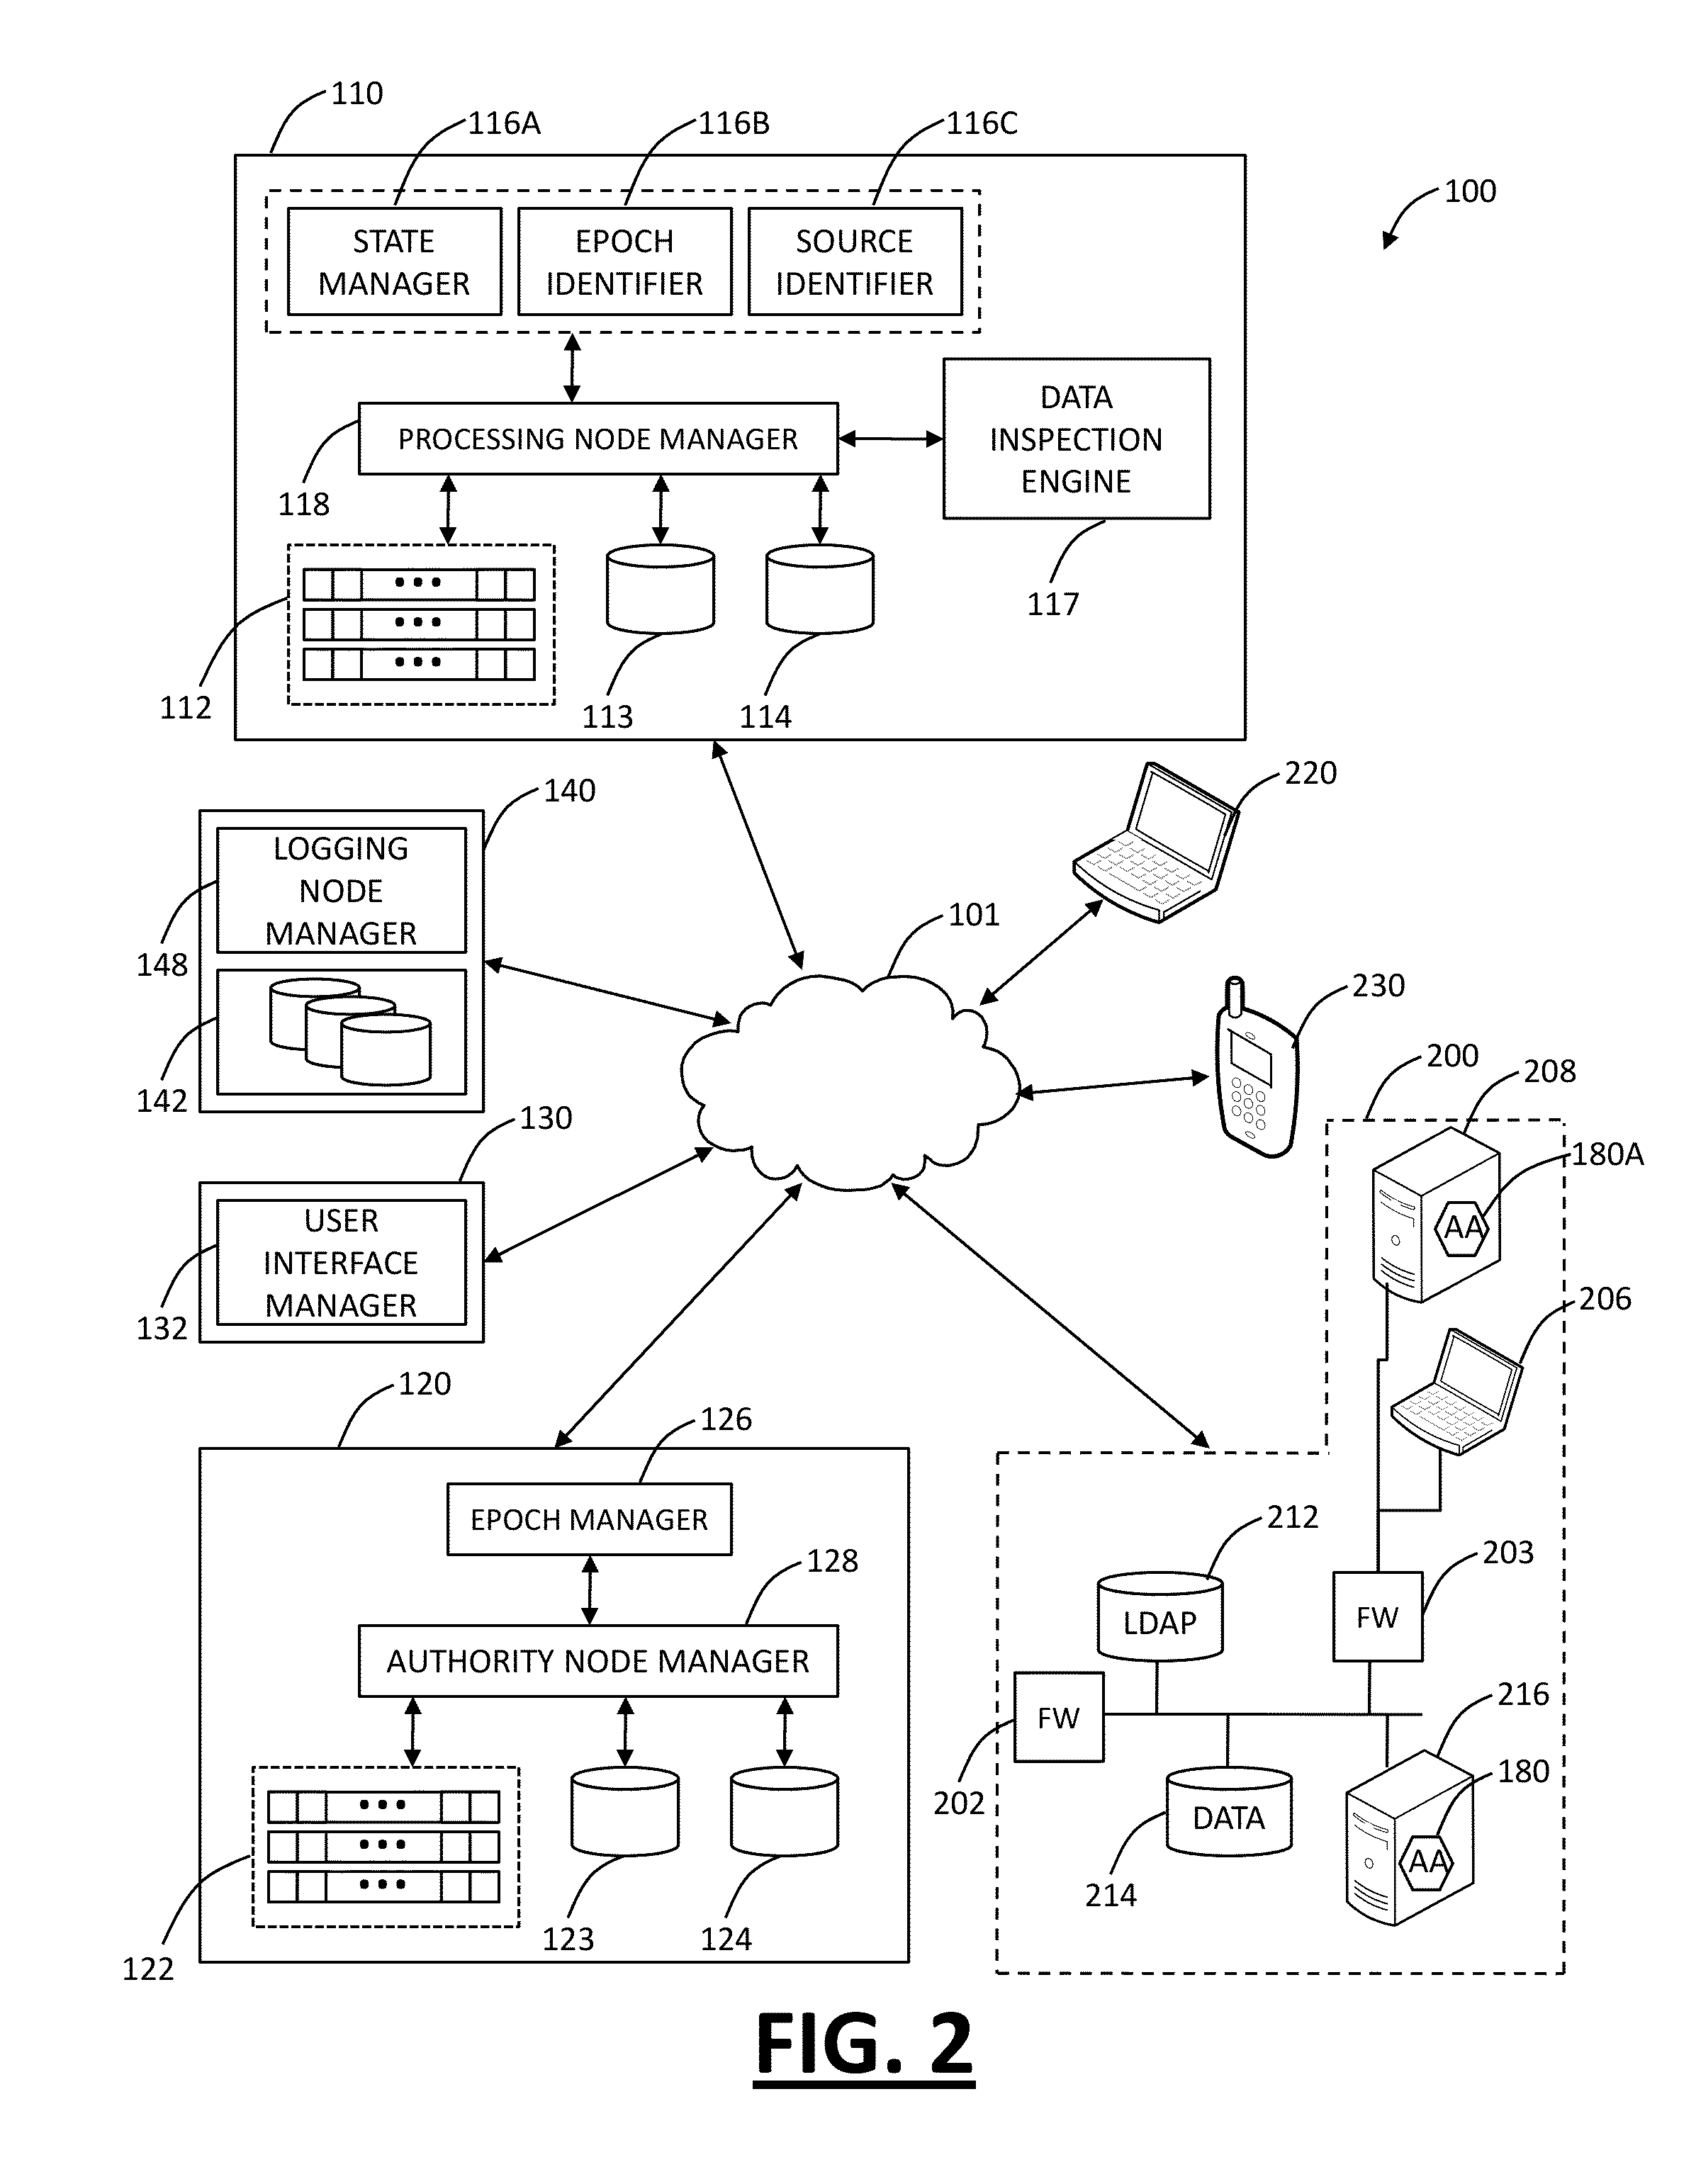 Distributed, multi-tenant virtual private network cloud systems and methods for mobile security and policy enforcement